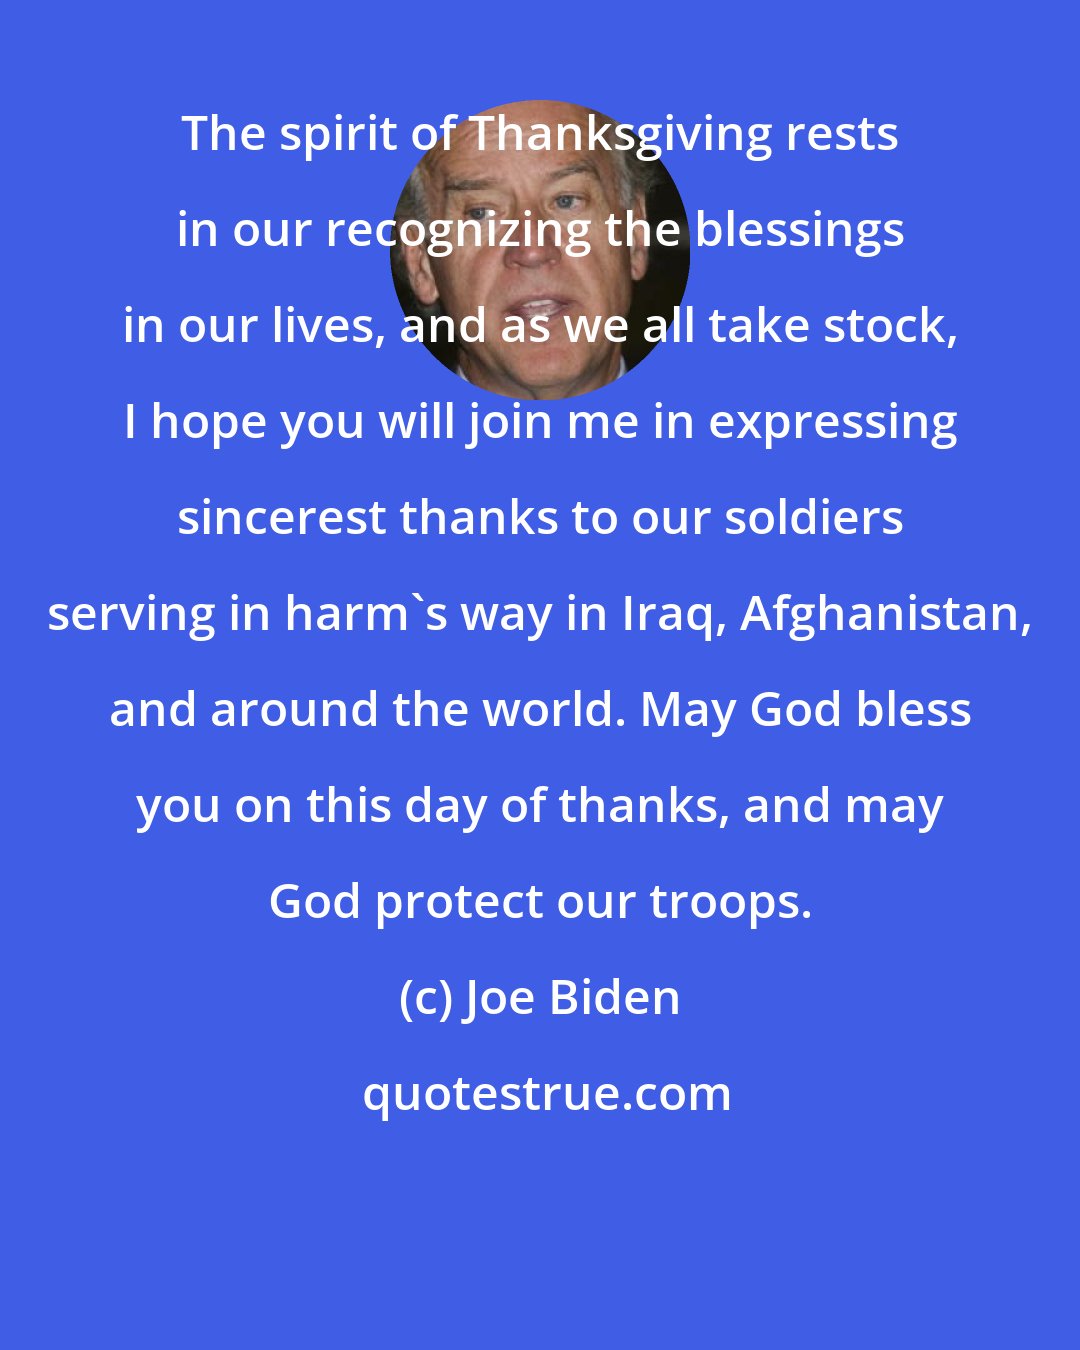 Joe Biden: The spirit of Thanksgiving rests in our recognizing the blessings in our lives, and as we all take stock, I hope you will join me in expressing sincerest thanks to our soldiers serving in harm's way in Iraq, Afghanistan, and around the world. May God bless you on this day of thanks, and may God protect our troops.